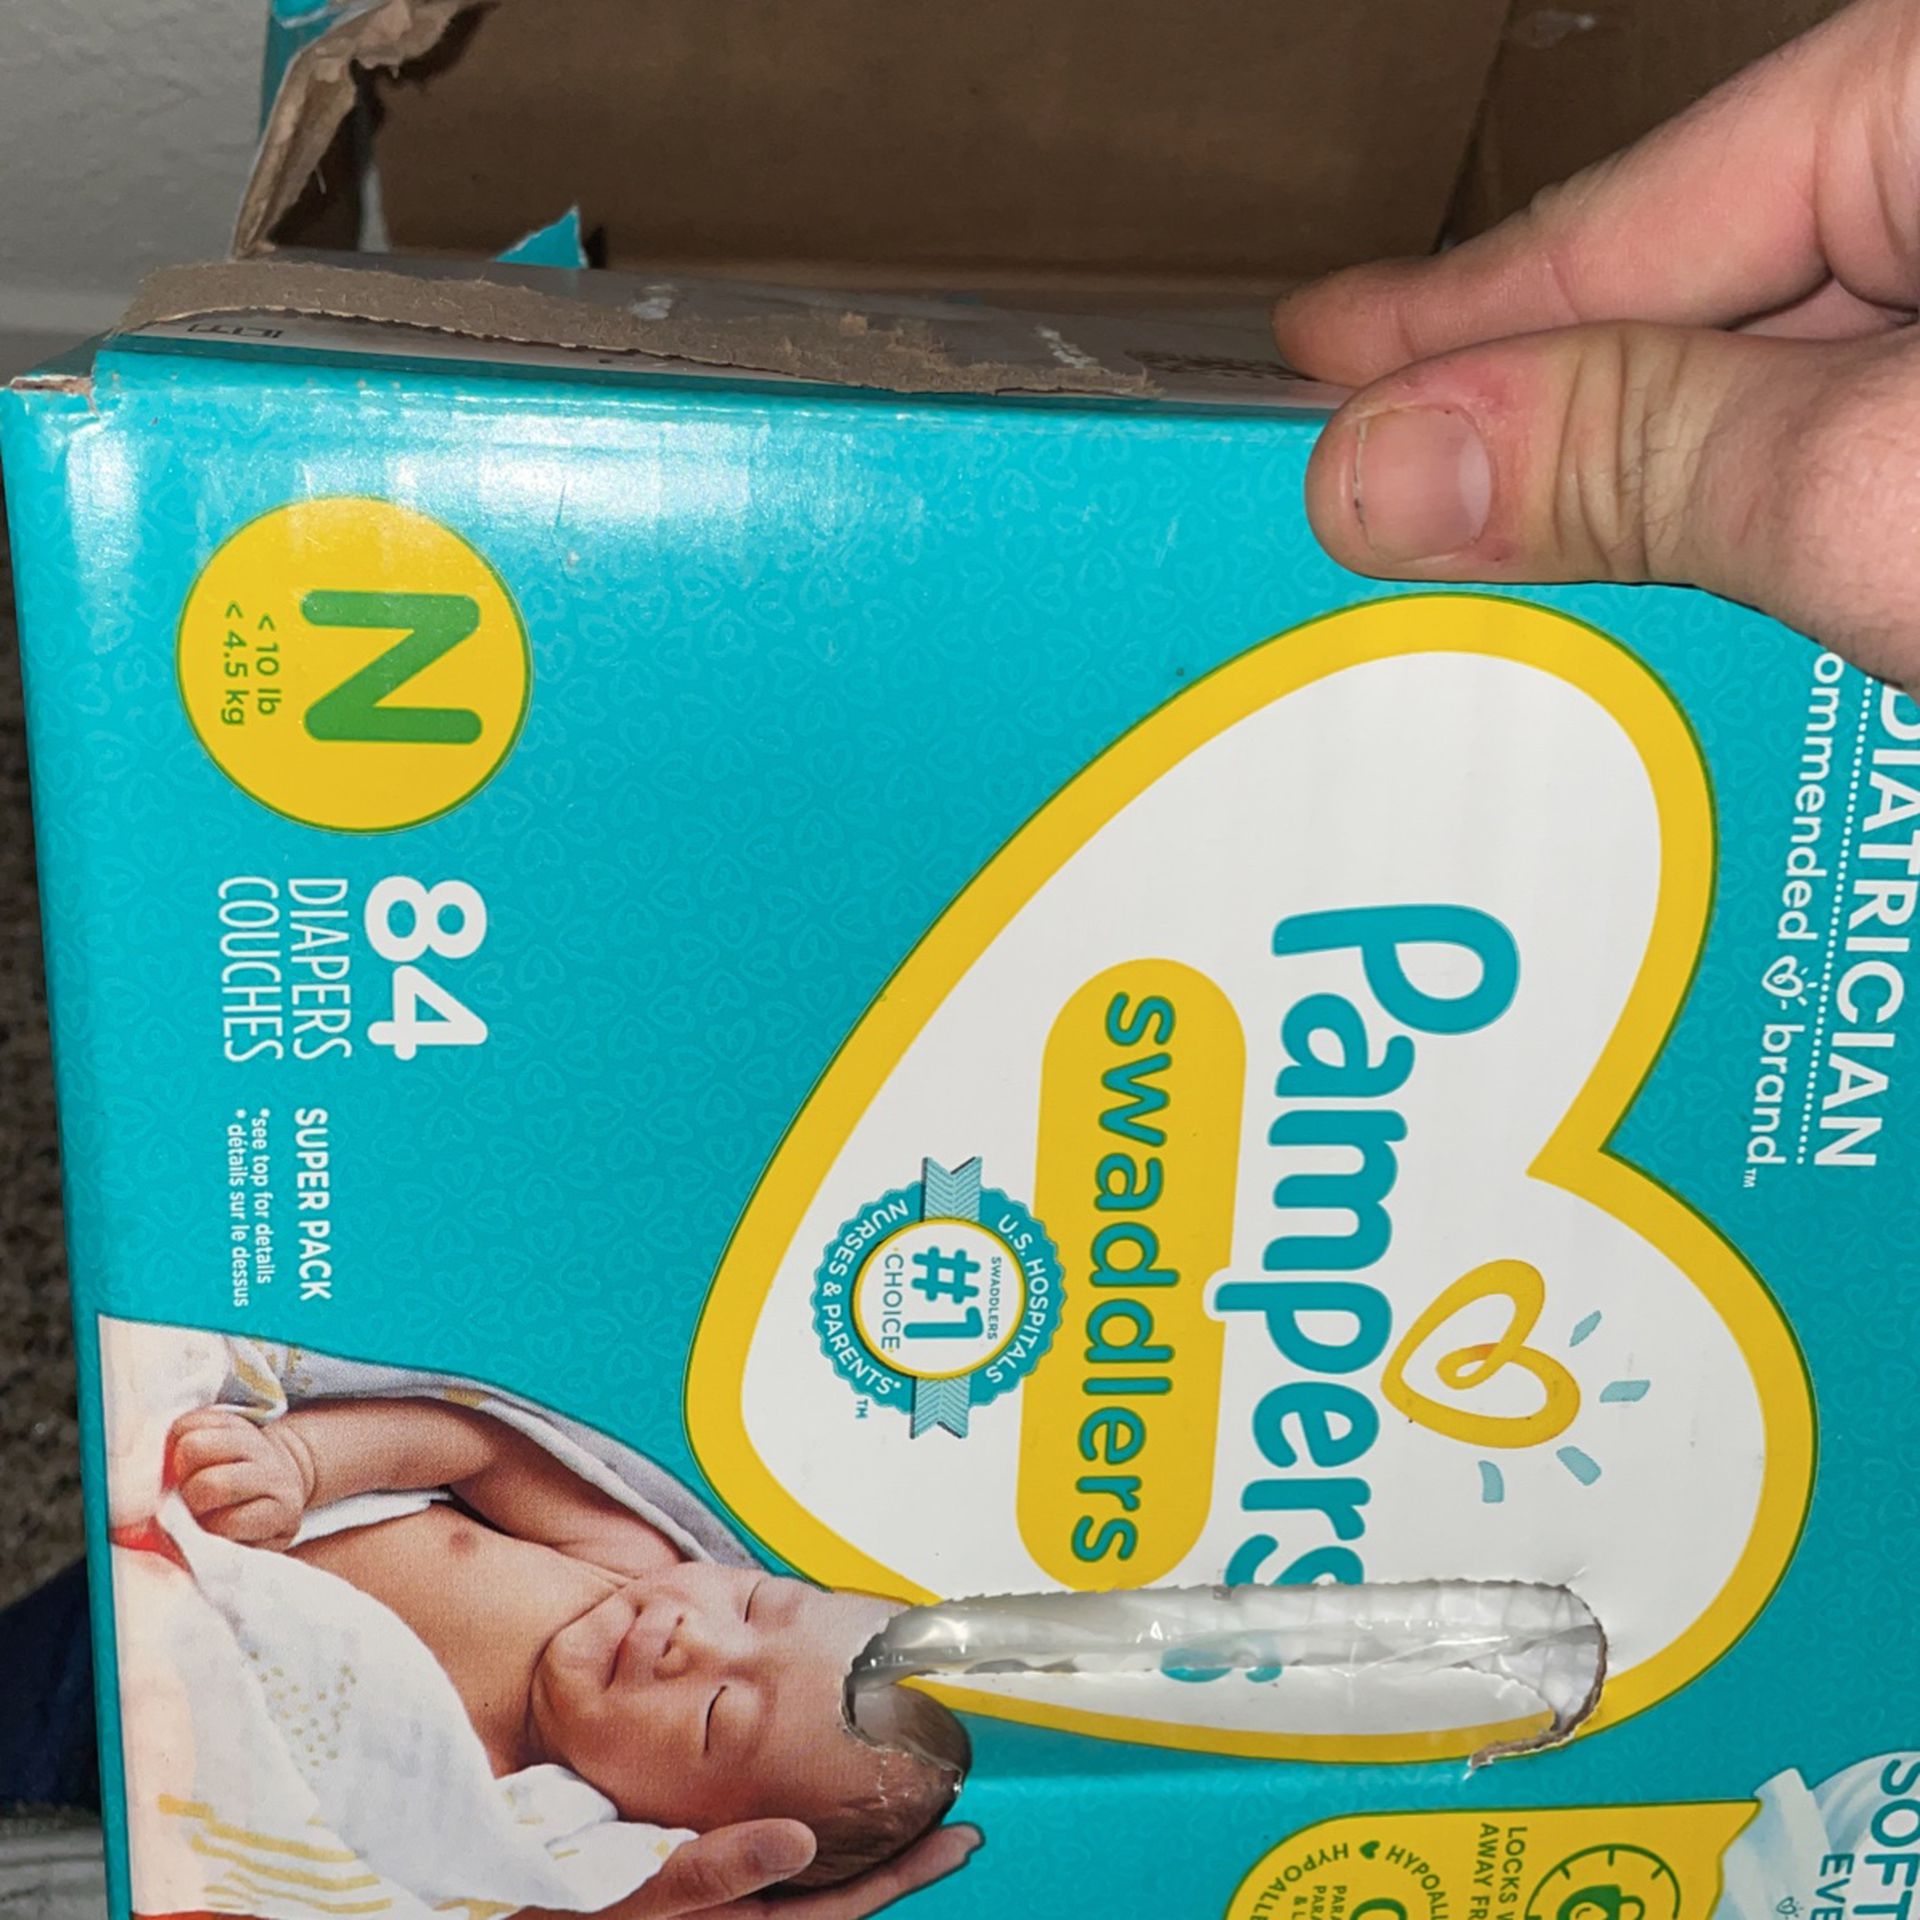 Baby Clothes / Brand New Diapers 